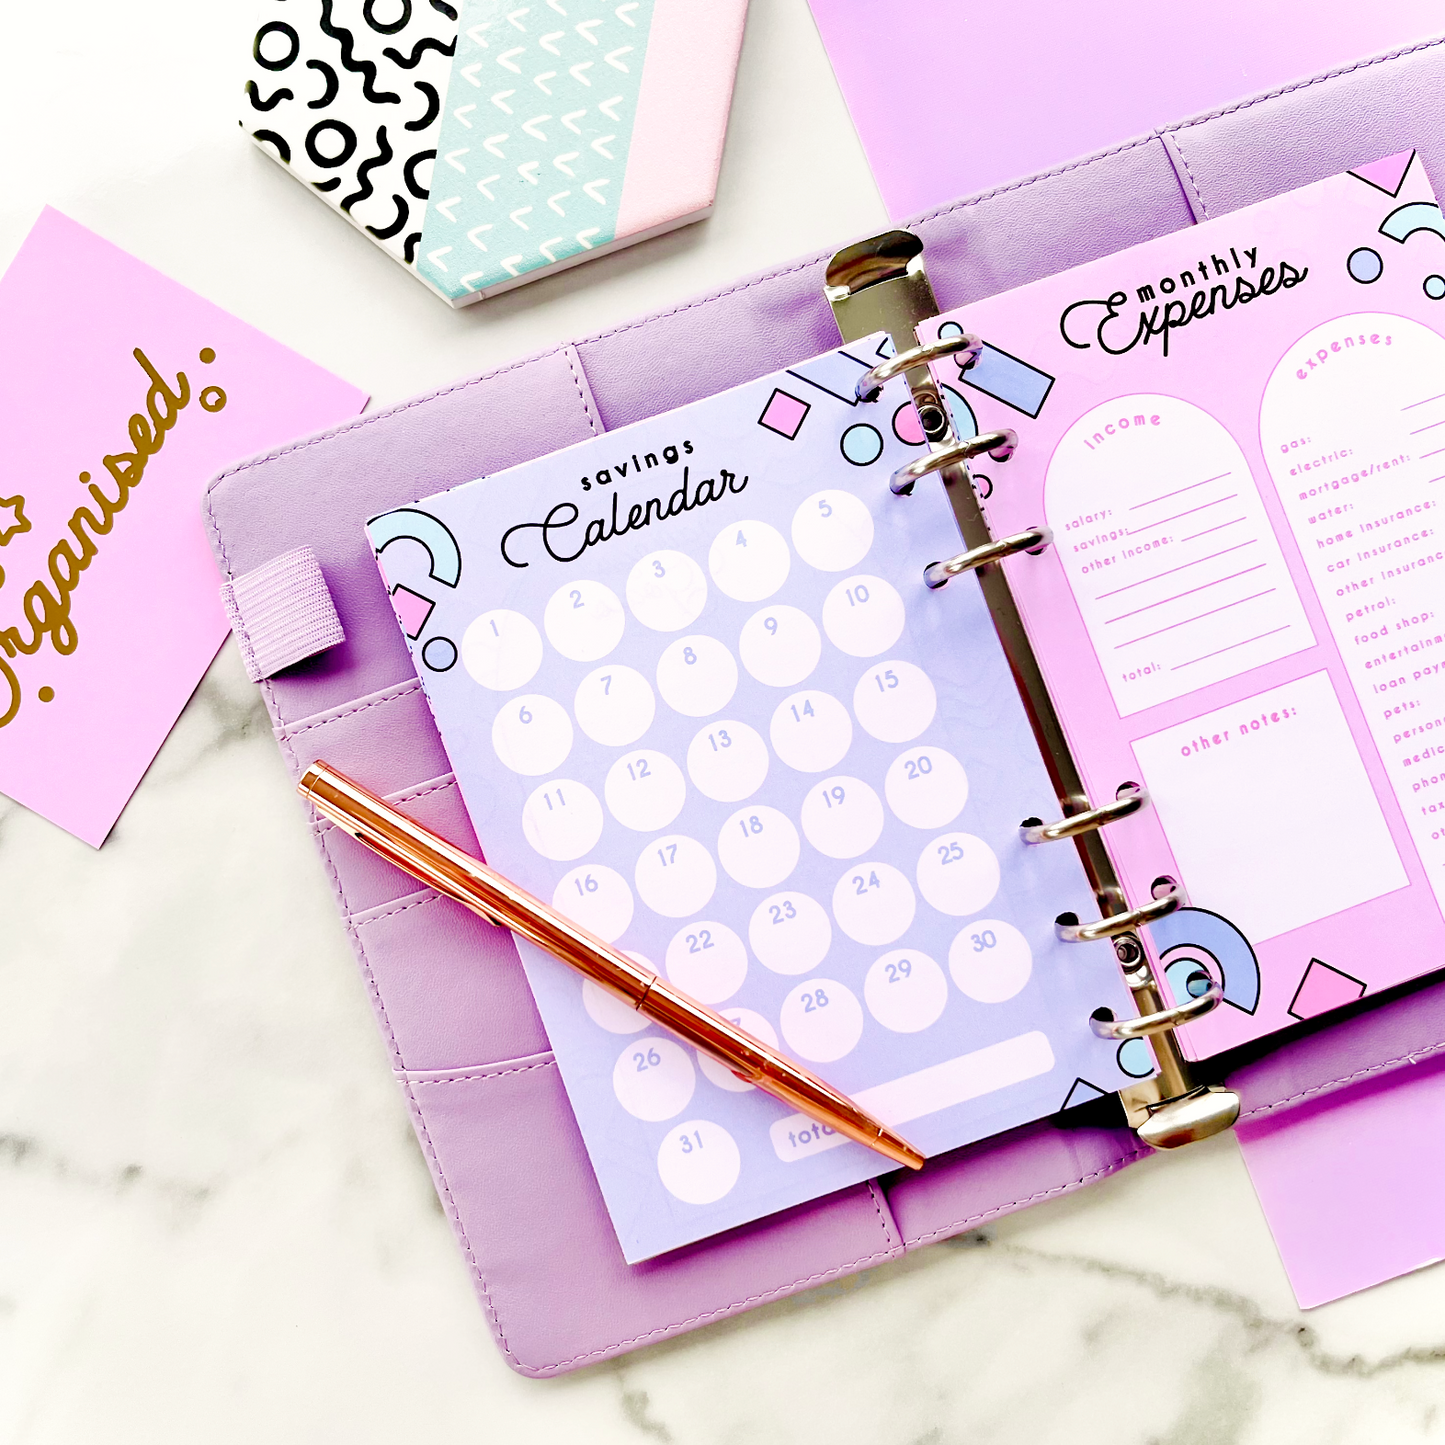 Budget Planner Pages (Download)